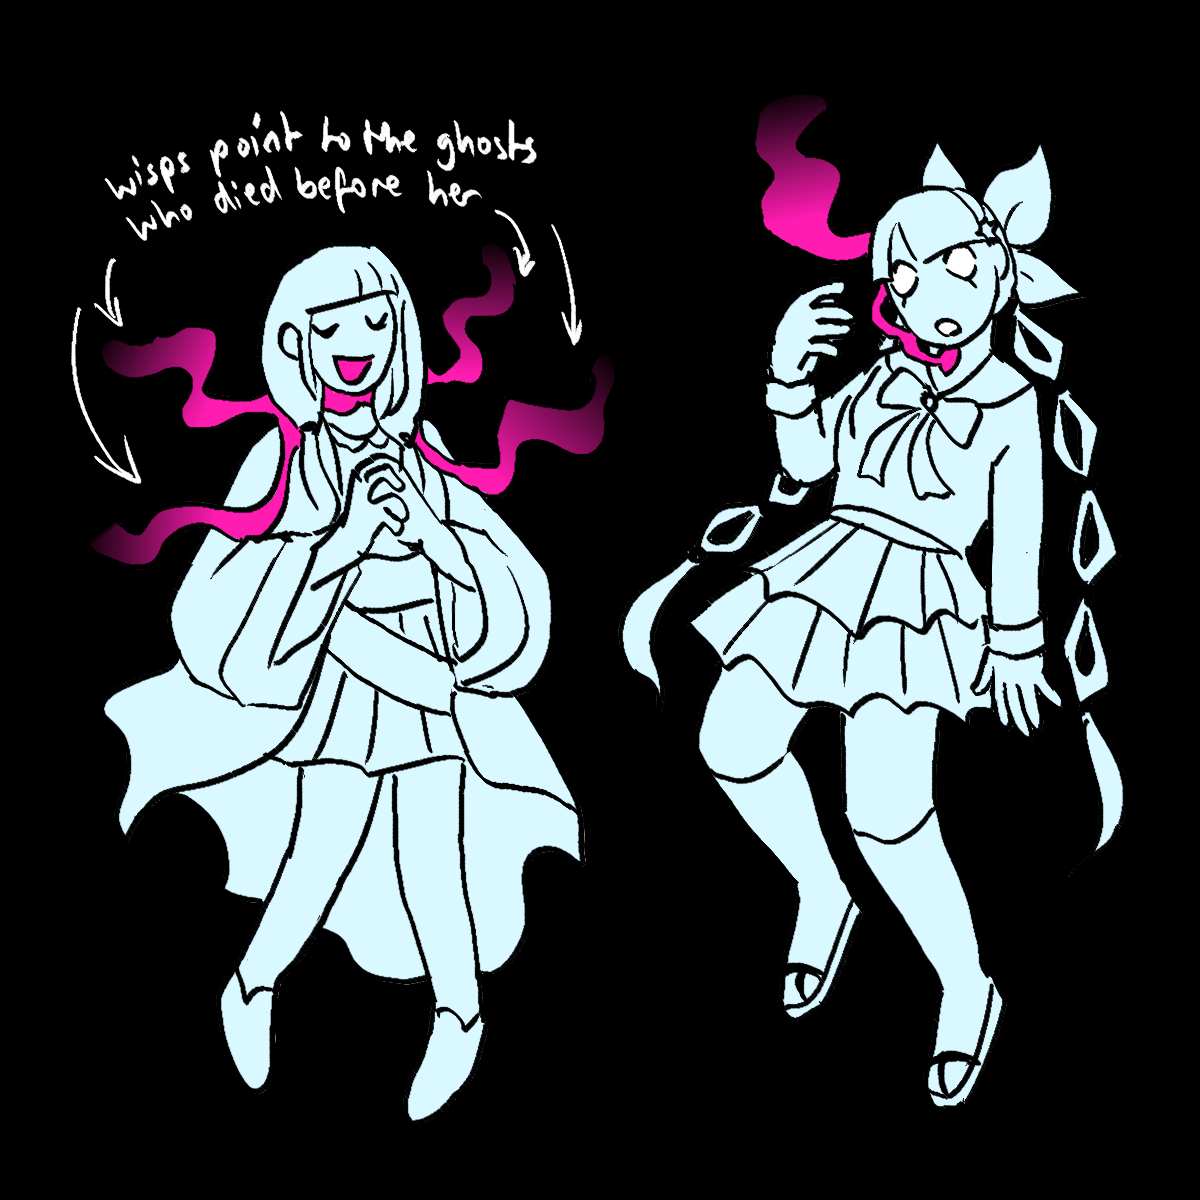 a drawing of angie and tenko as ghosts. angie has four wisps coming from her neck
		with arrows pointing to them saying 'wisps point to the ghosts who died before her'.